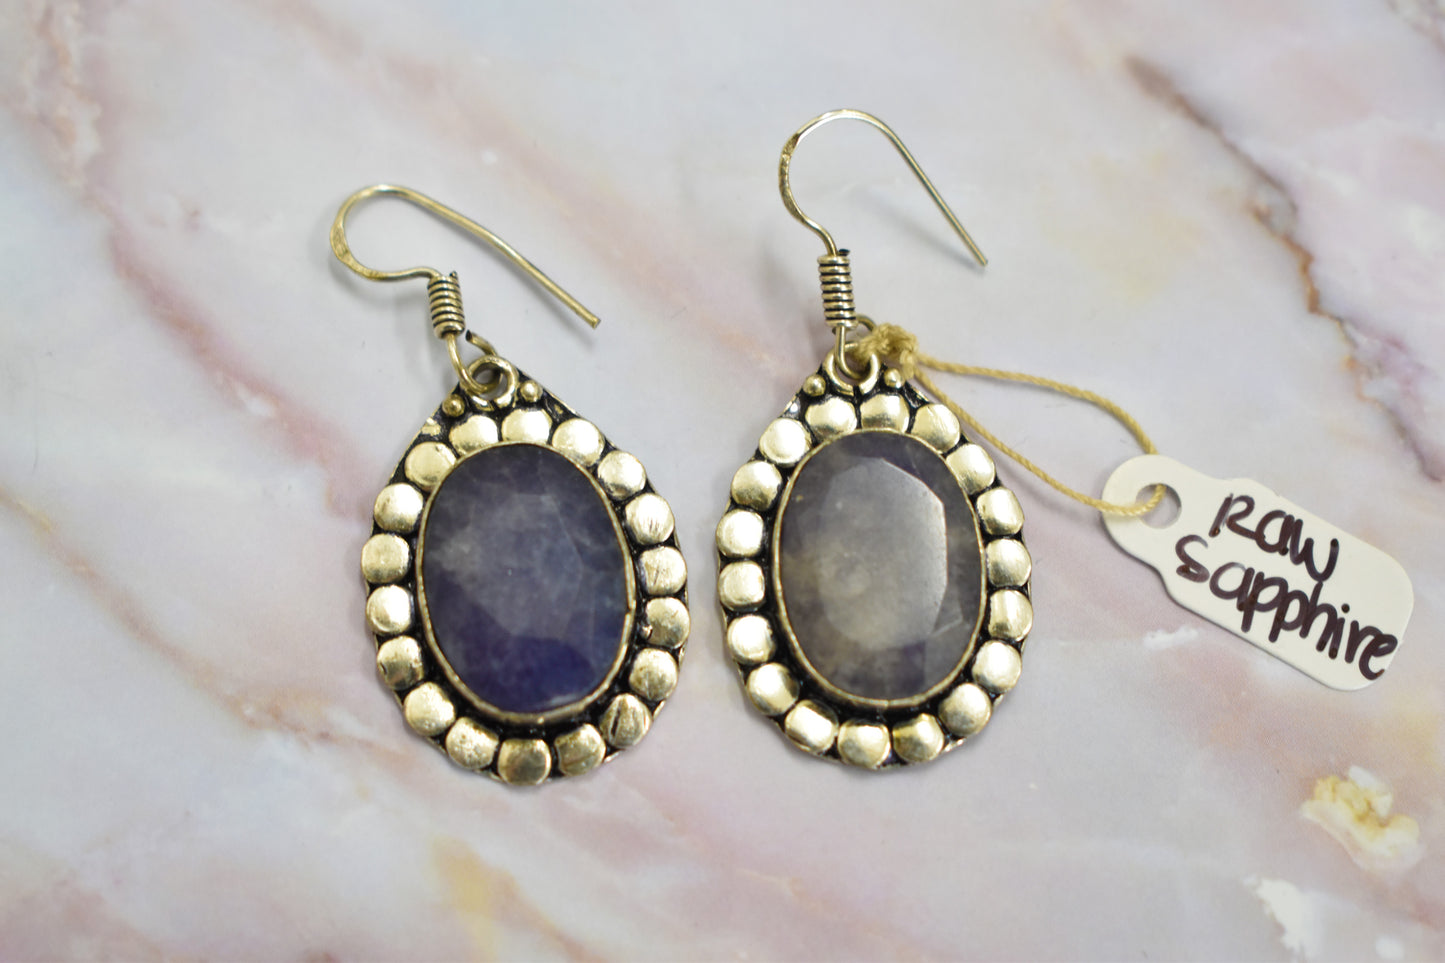 stones-of-transformation - Raw Sapphire Earrings - Stones of Transformation - 